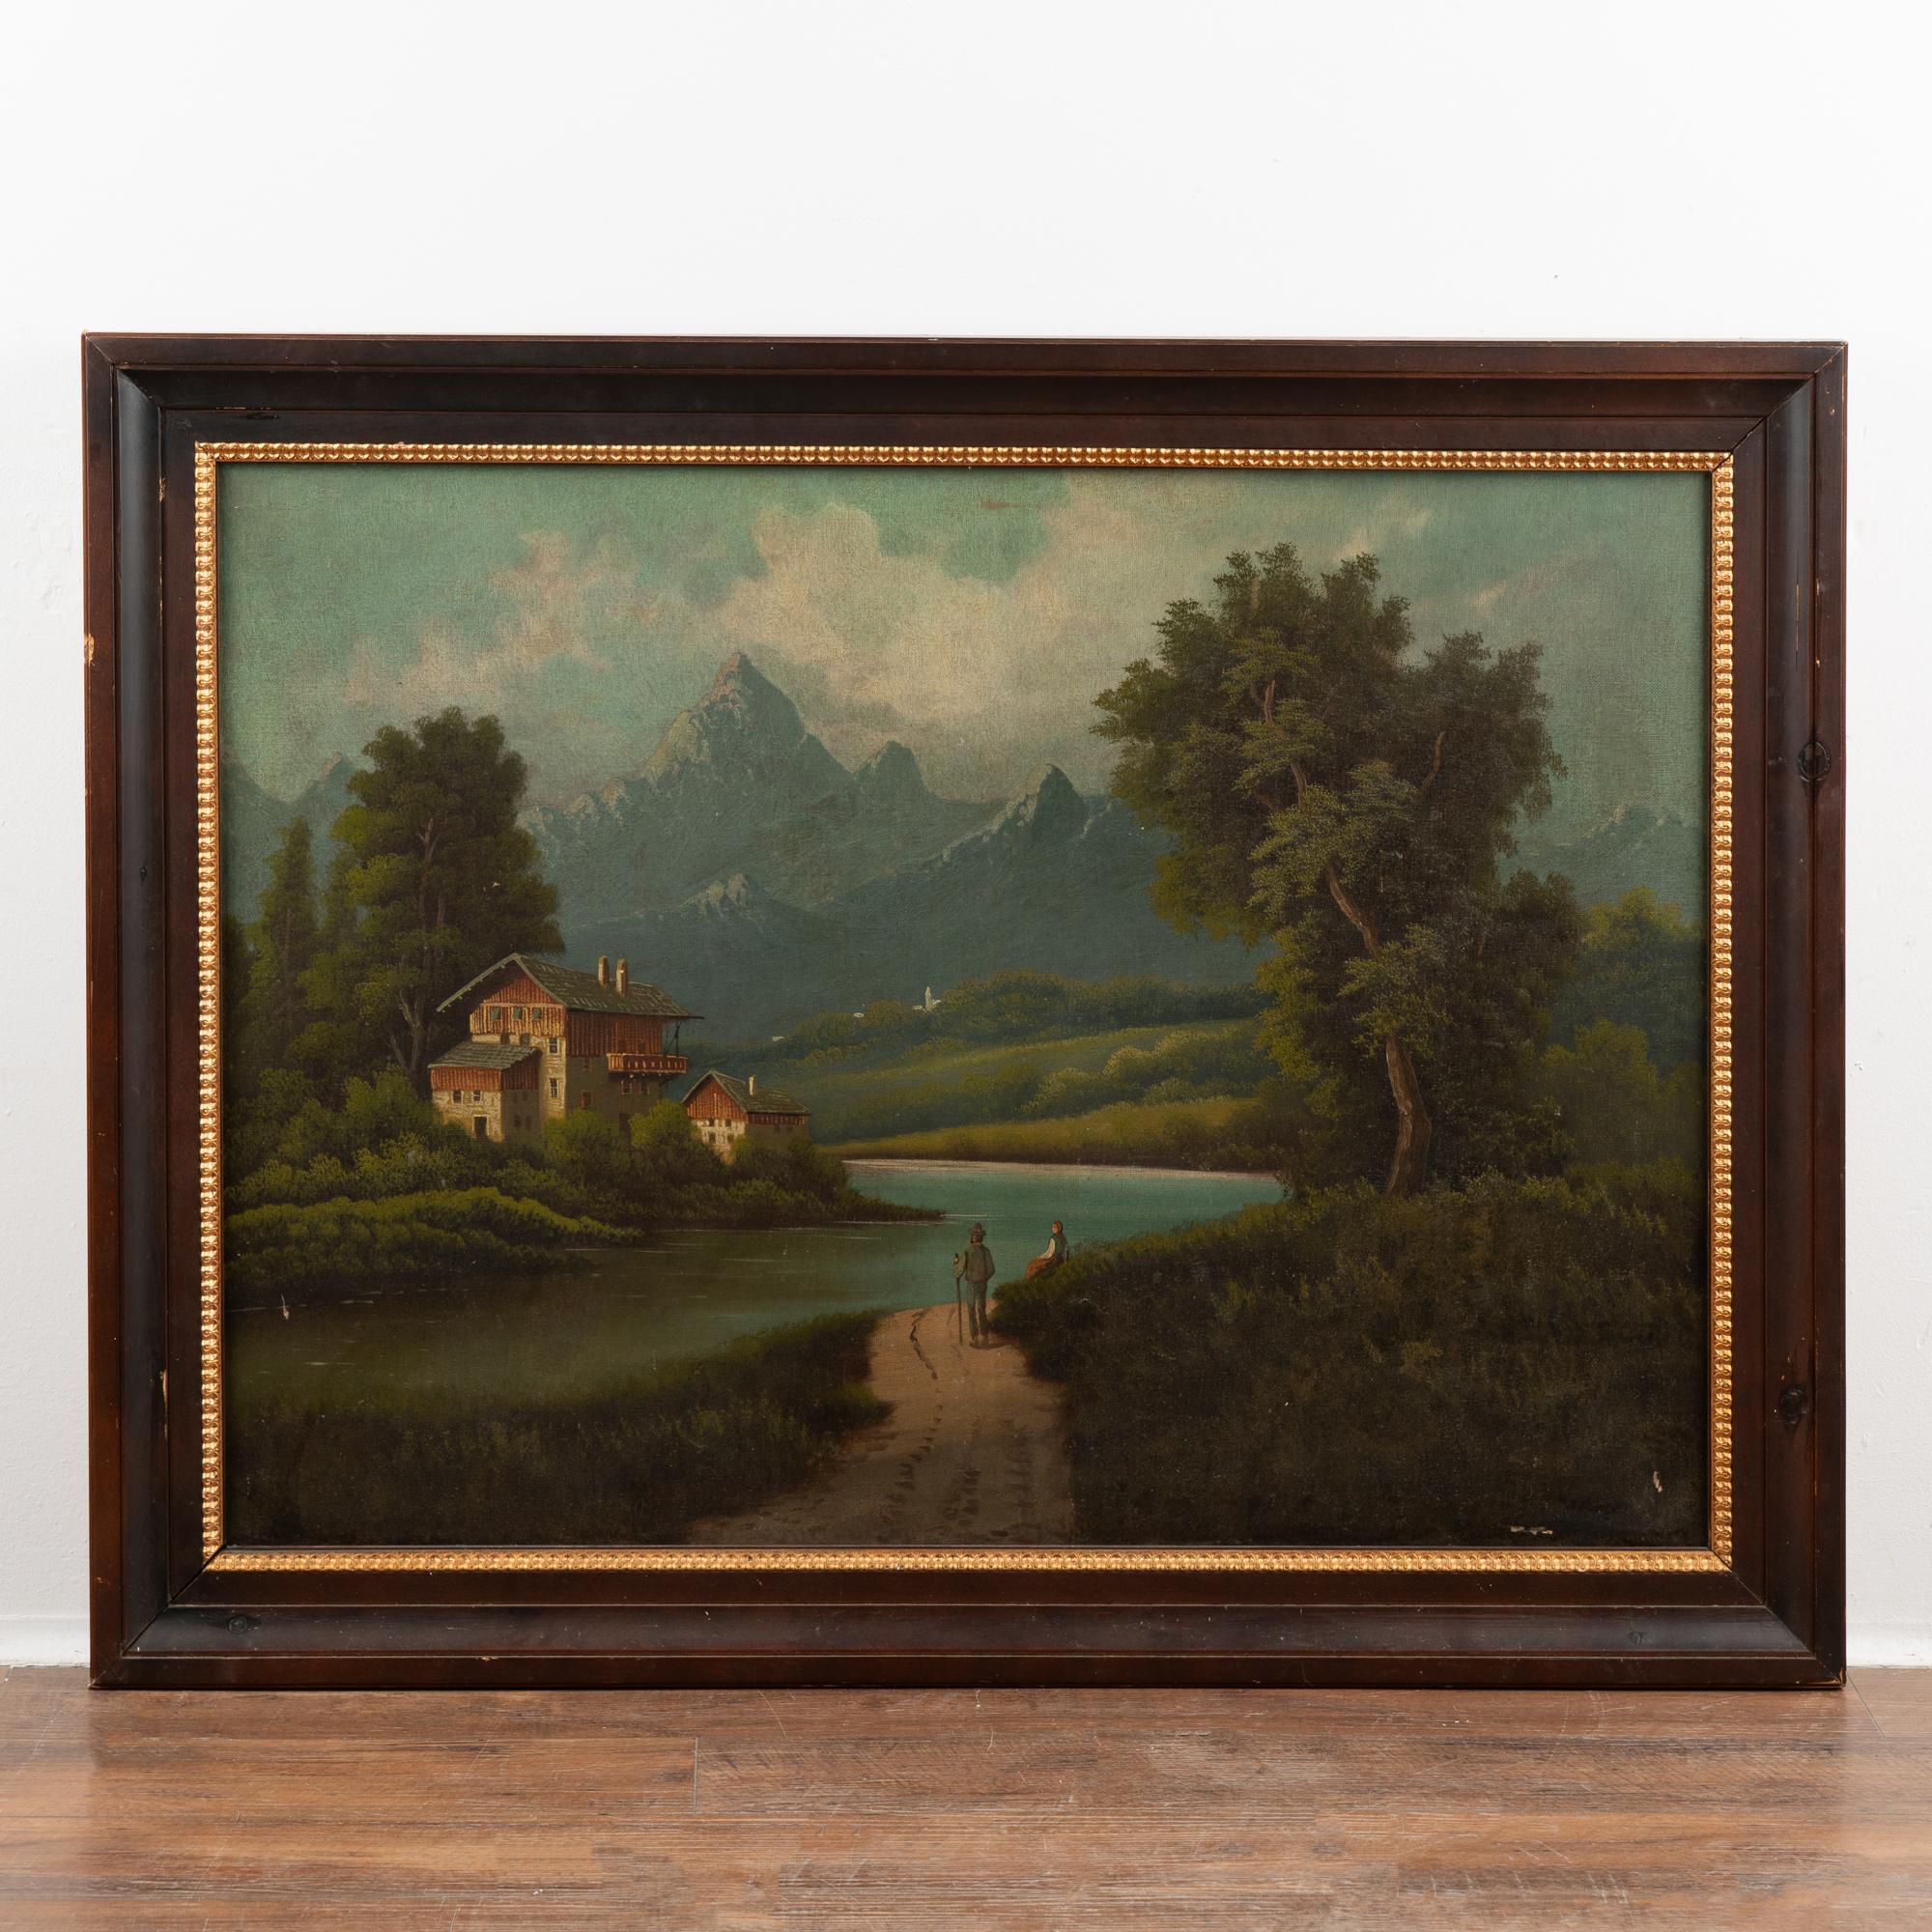 Original oil on canvas painting of peaceful European country scene along river with mountains in background, couple in foreground. Artist unknown.
Old repairs/re-touches. Craquelure, some pin pricks, visible scuffs, etc. Canvas is intact and will